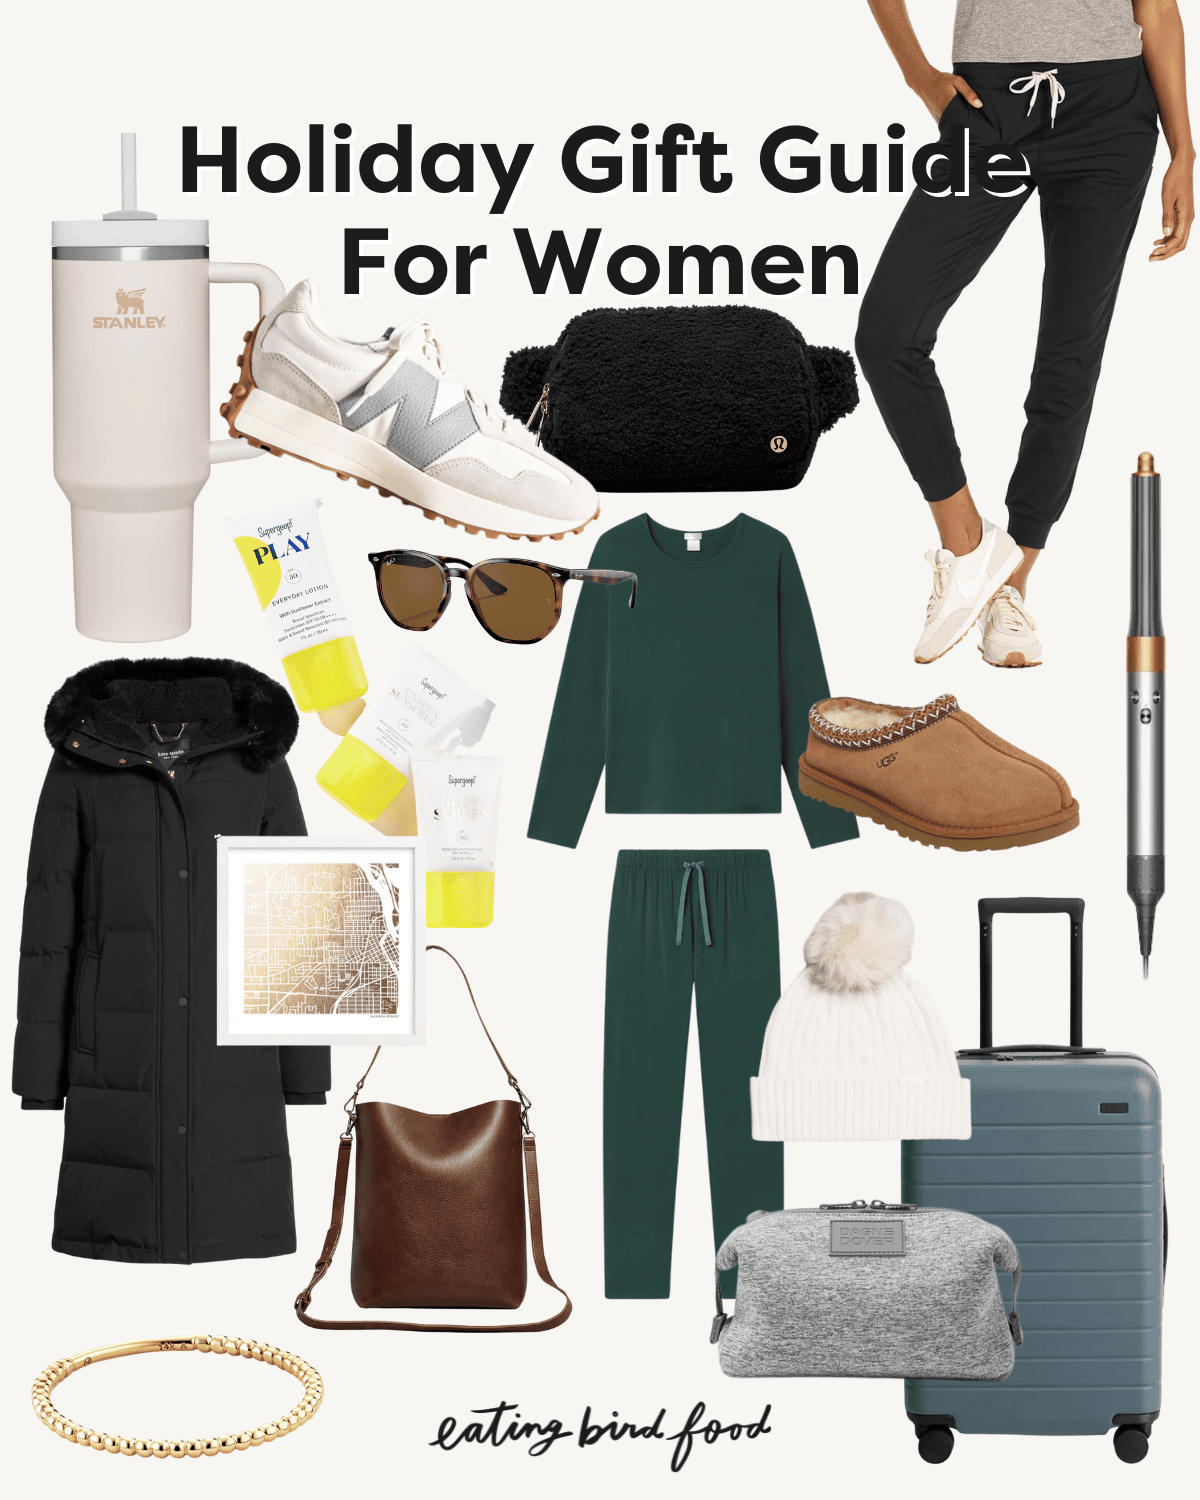 A holiday gift guide for women collage graphic.